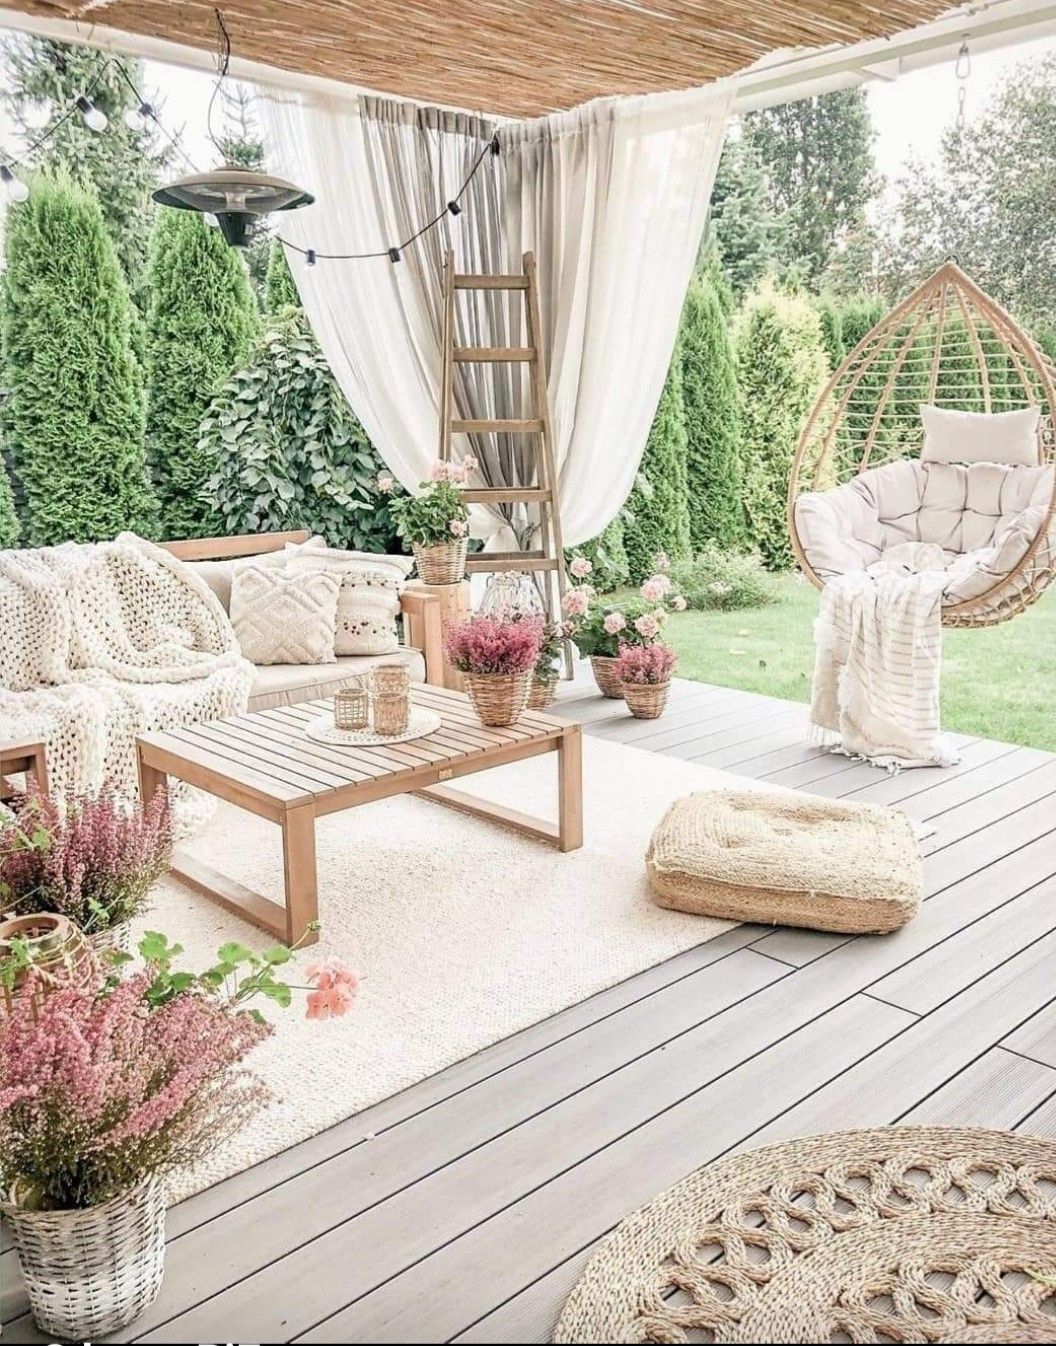 The Aesthetic Patio for An Endless Summer